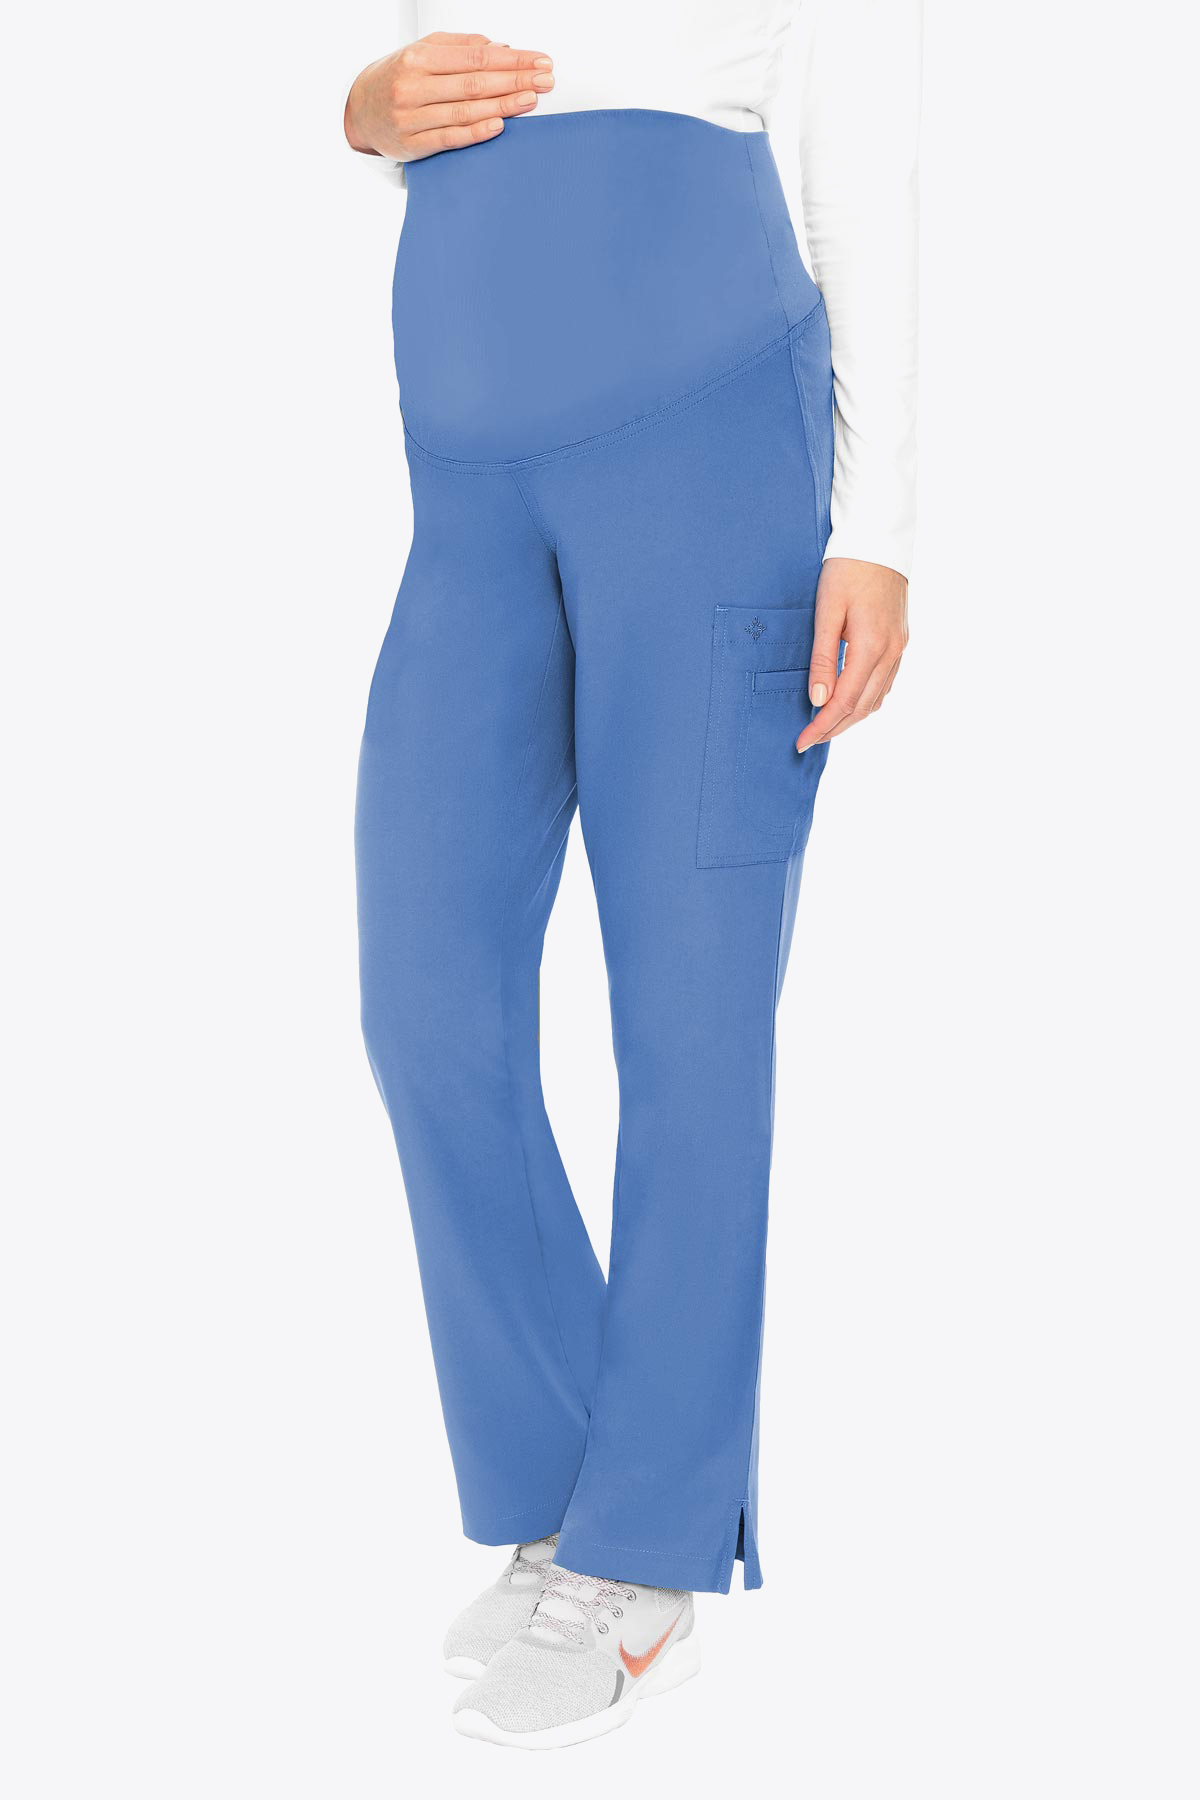 8727 Med Couture Activate Women's Maternity Pant – Henry Community Health  Employee Website